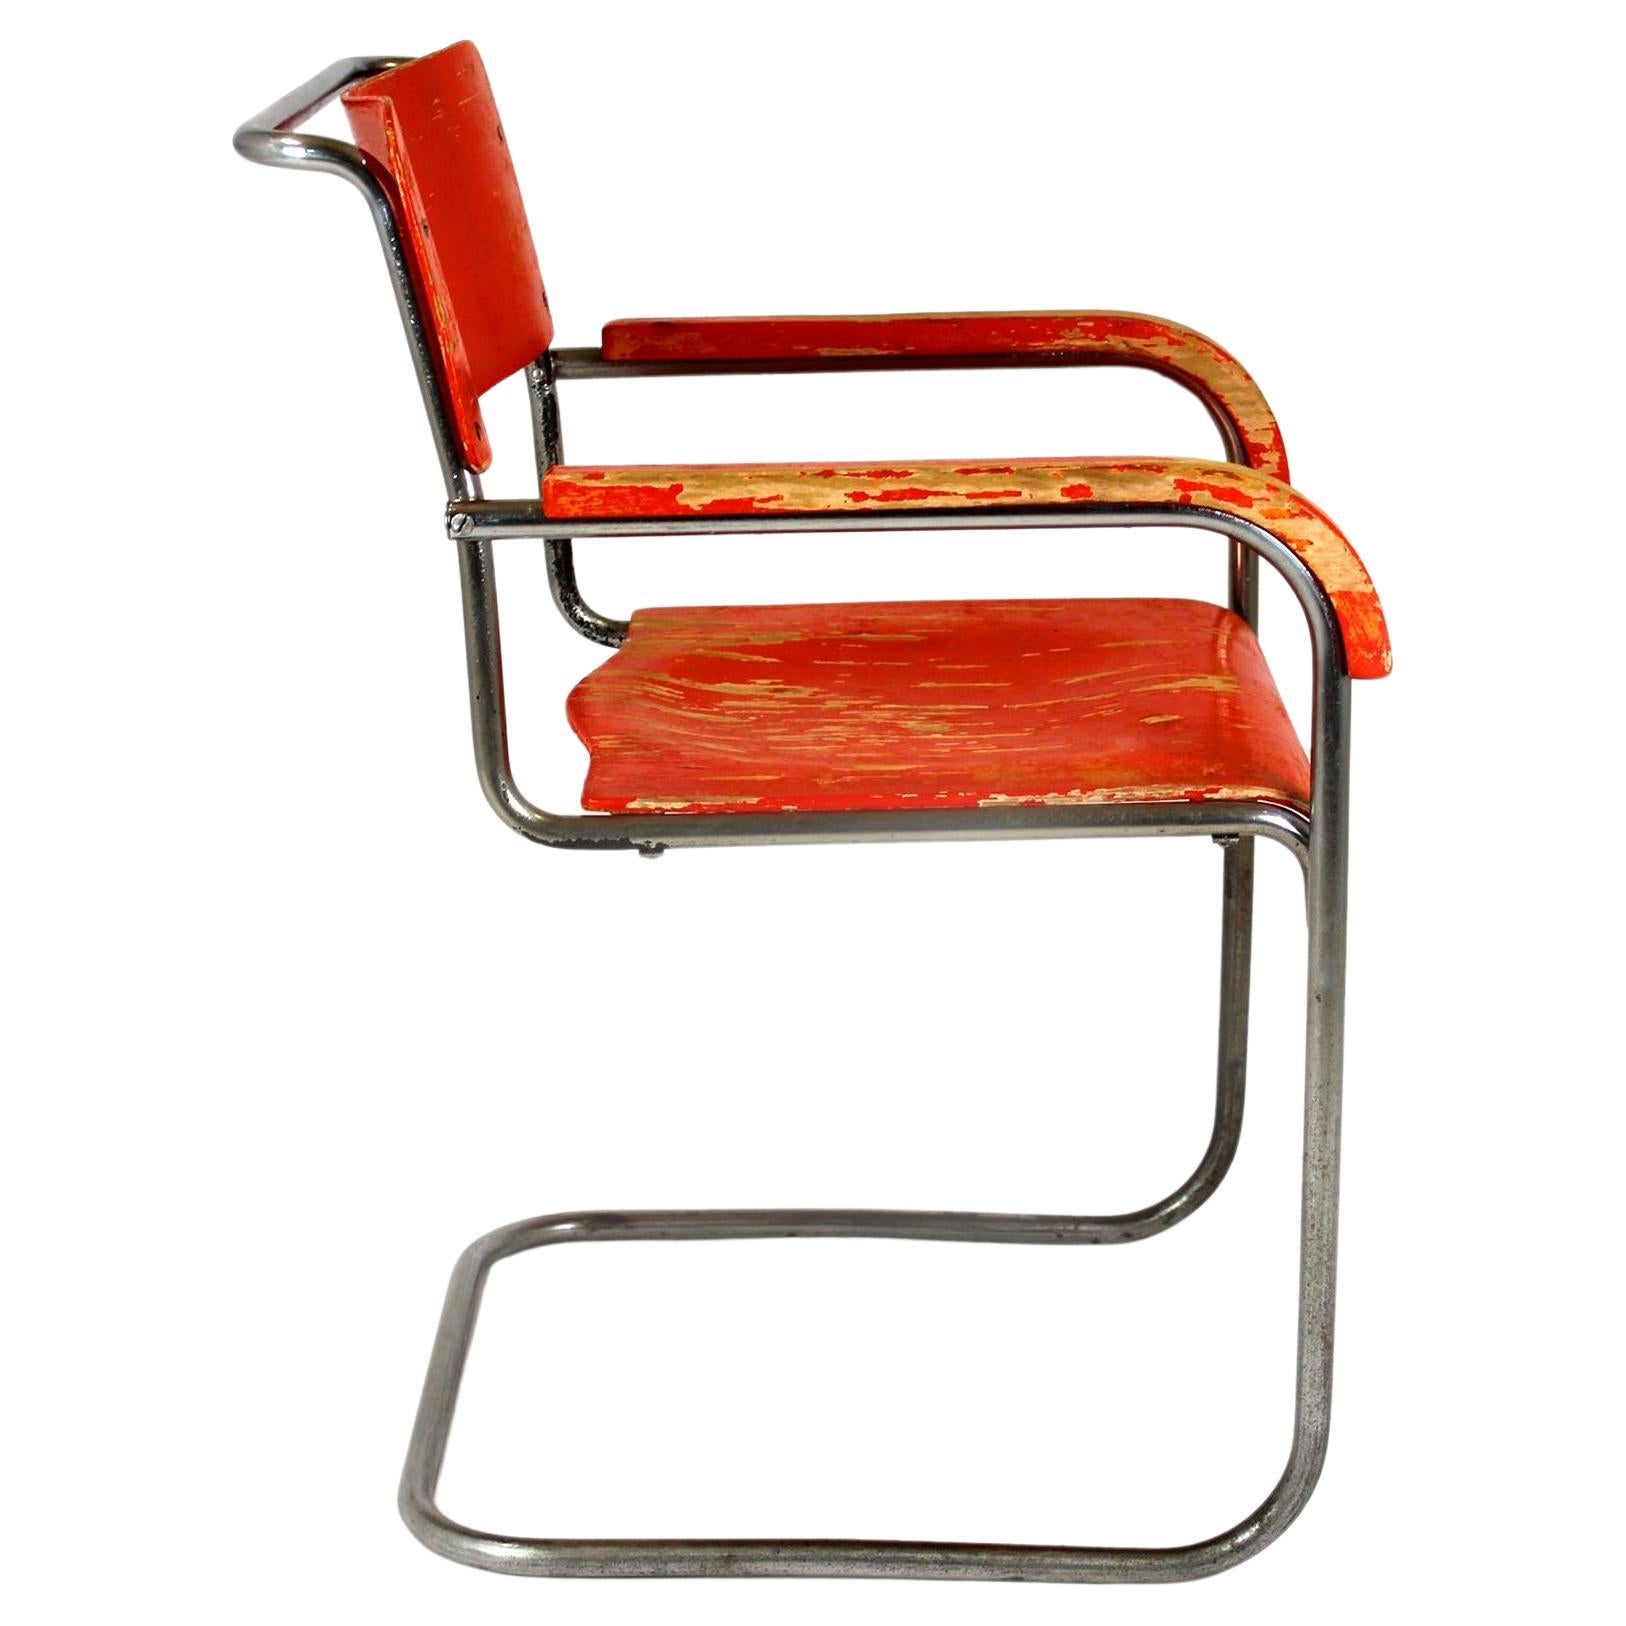 Bauhaus B34 Cantilever Chair in Plywood & Chrome by Marcel Breuer, 1930s For Sale